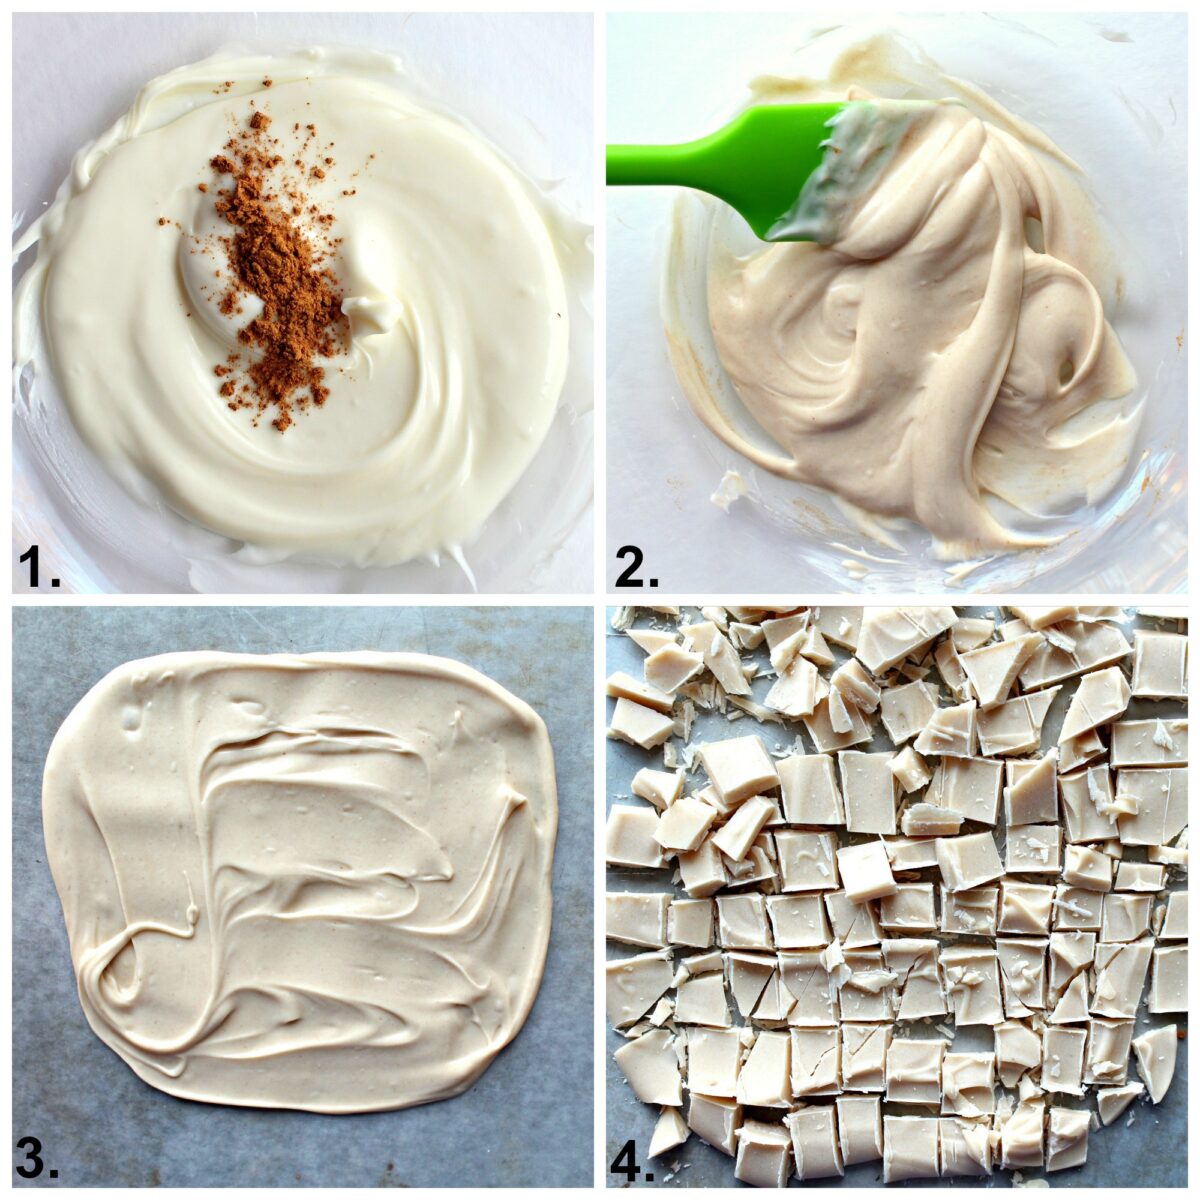 Cinnamon chips instructions; combine cinnamon and melted white chocolate,mix, spread, cut into chunks.